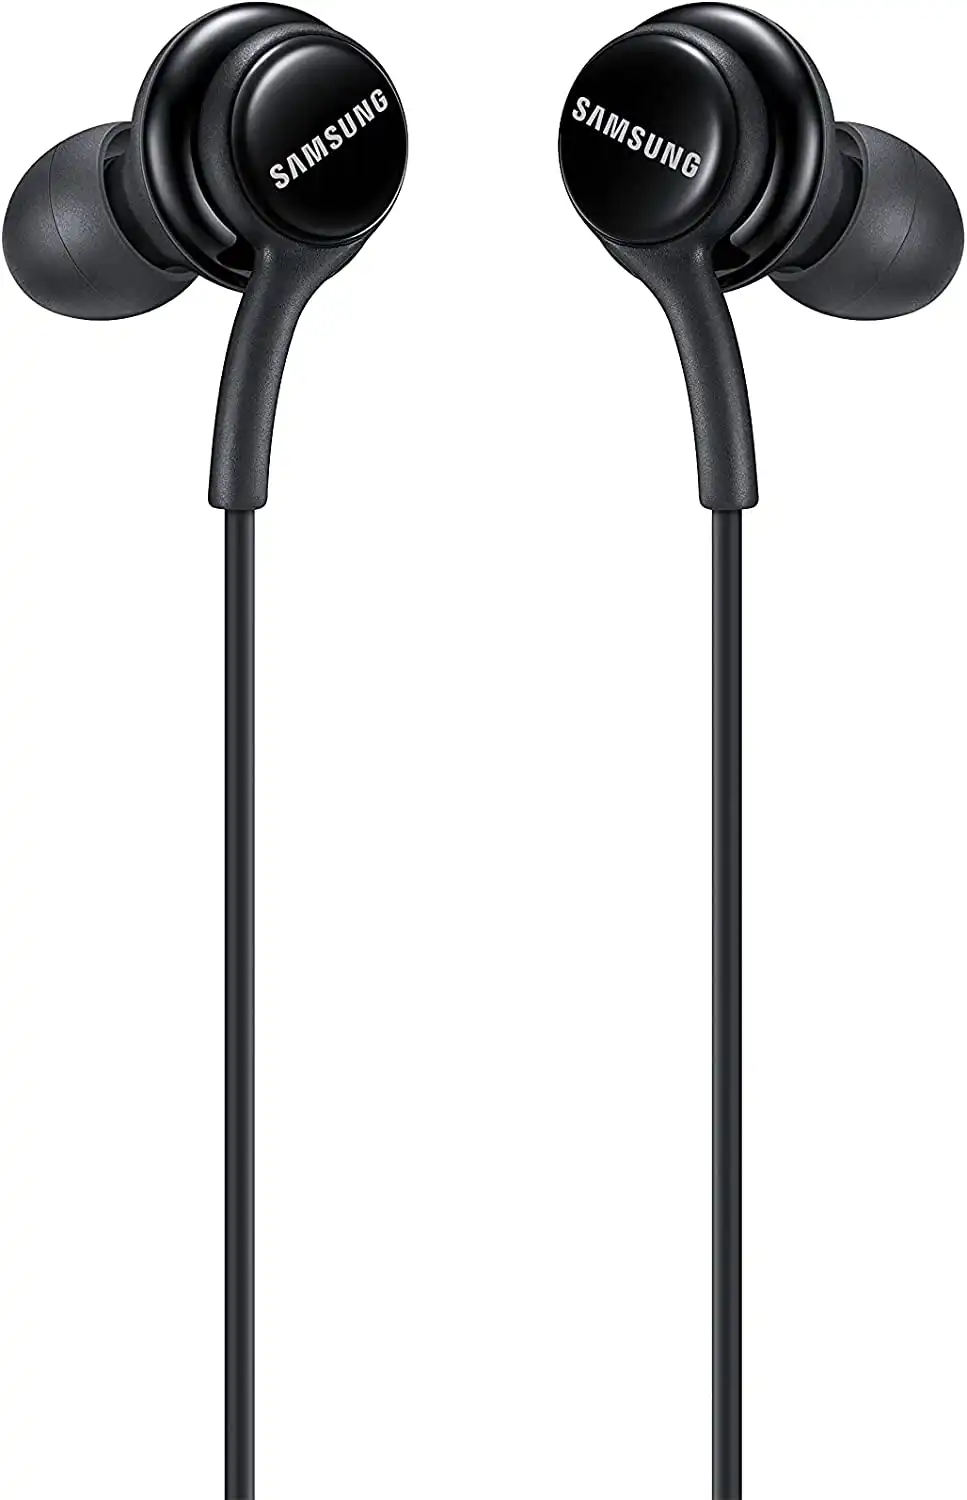 Samsung EO-IA500BBEGWW Wired Earphones, Clear Sound, Visible Controls, Black